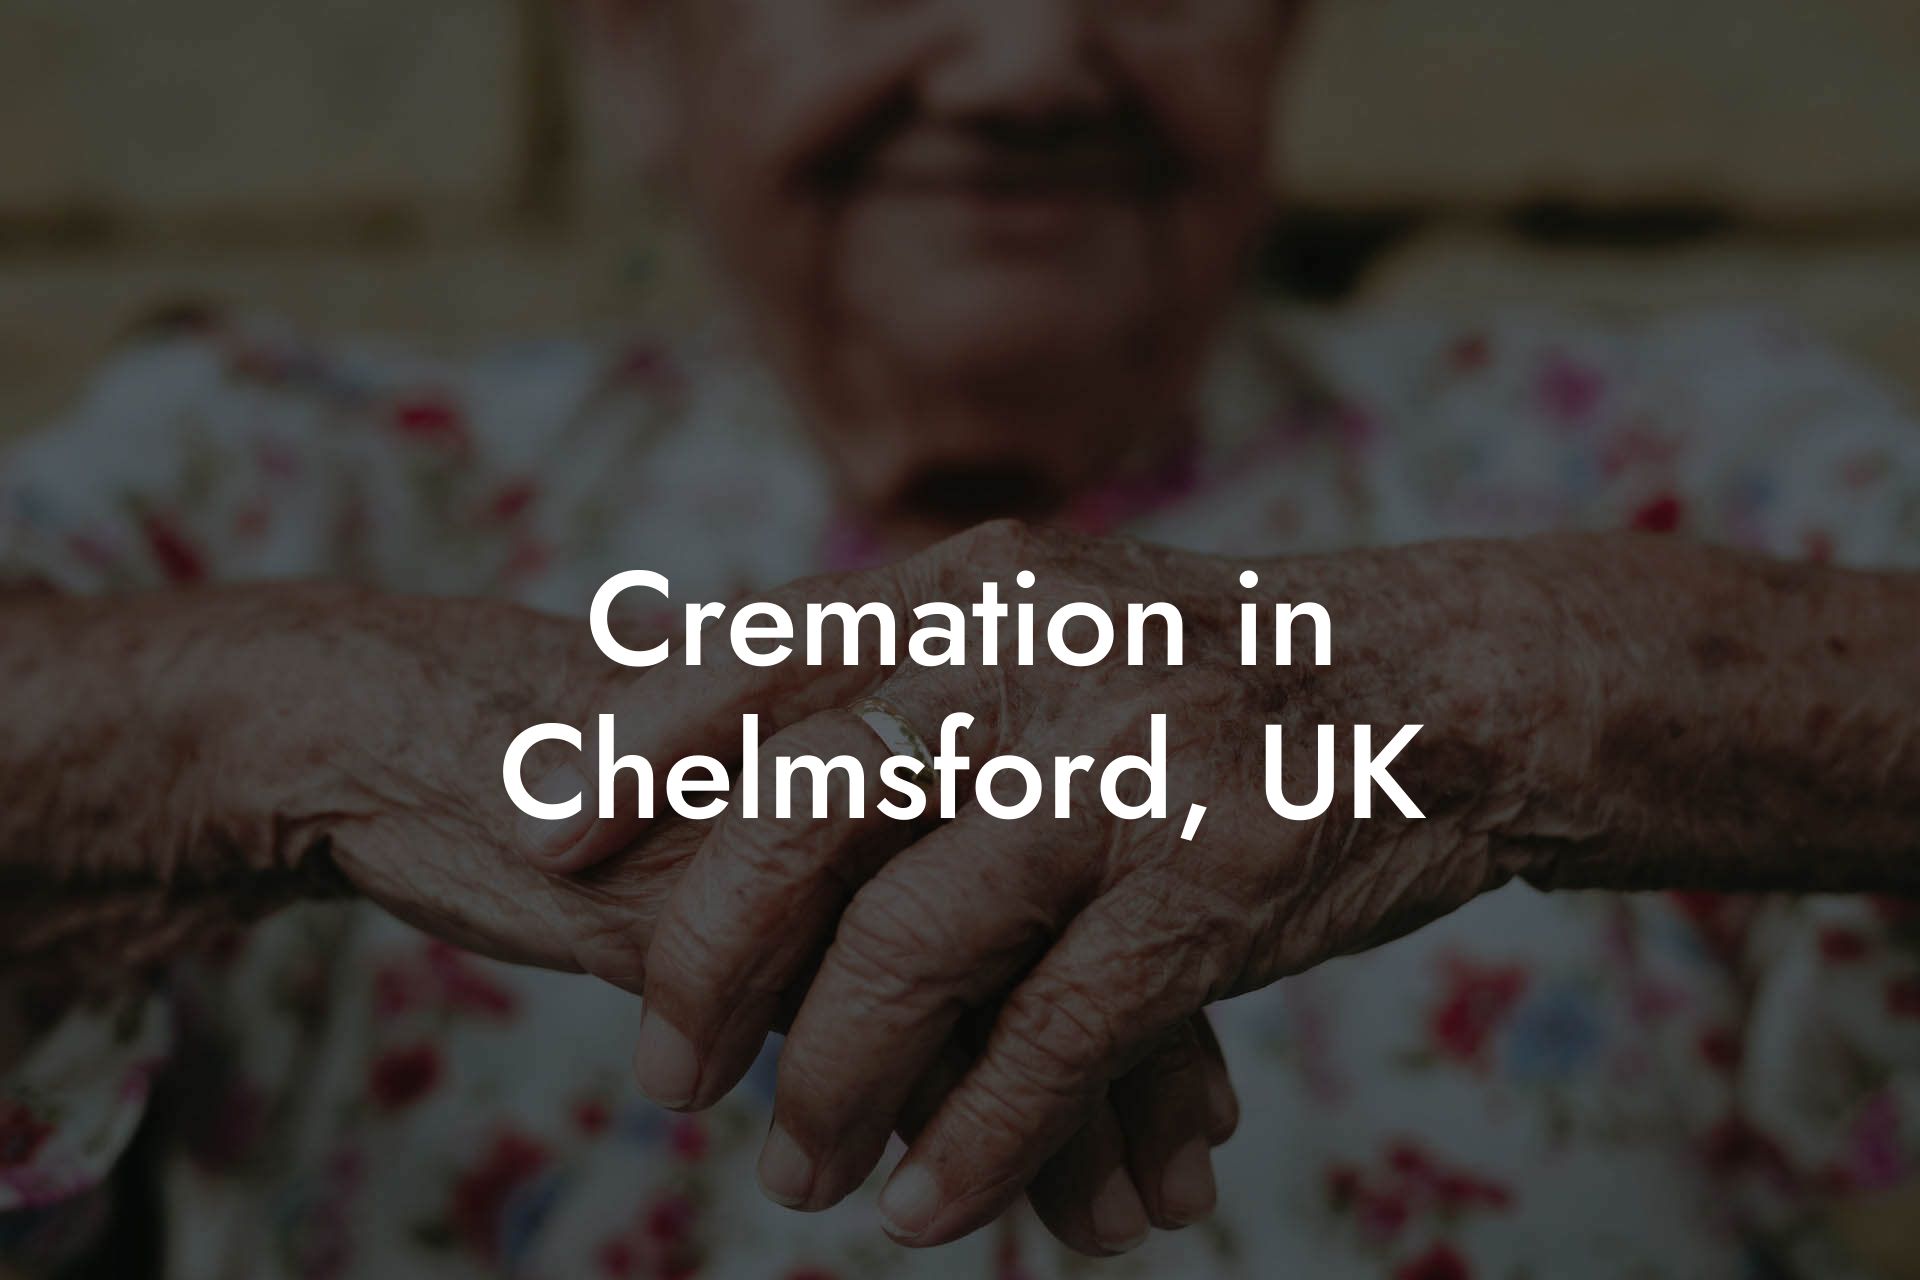 Cremation in Chelmsford, UK